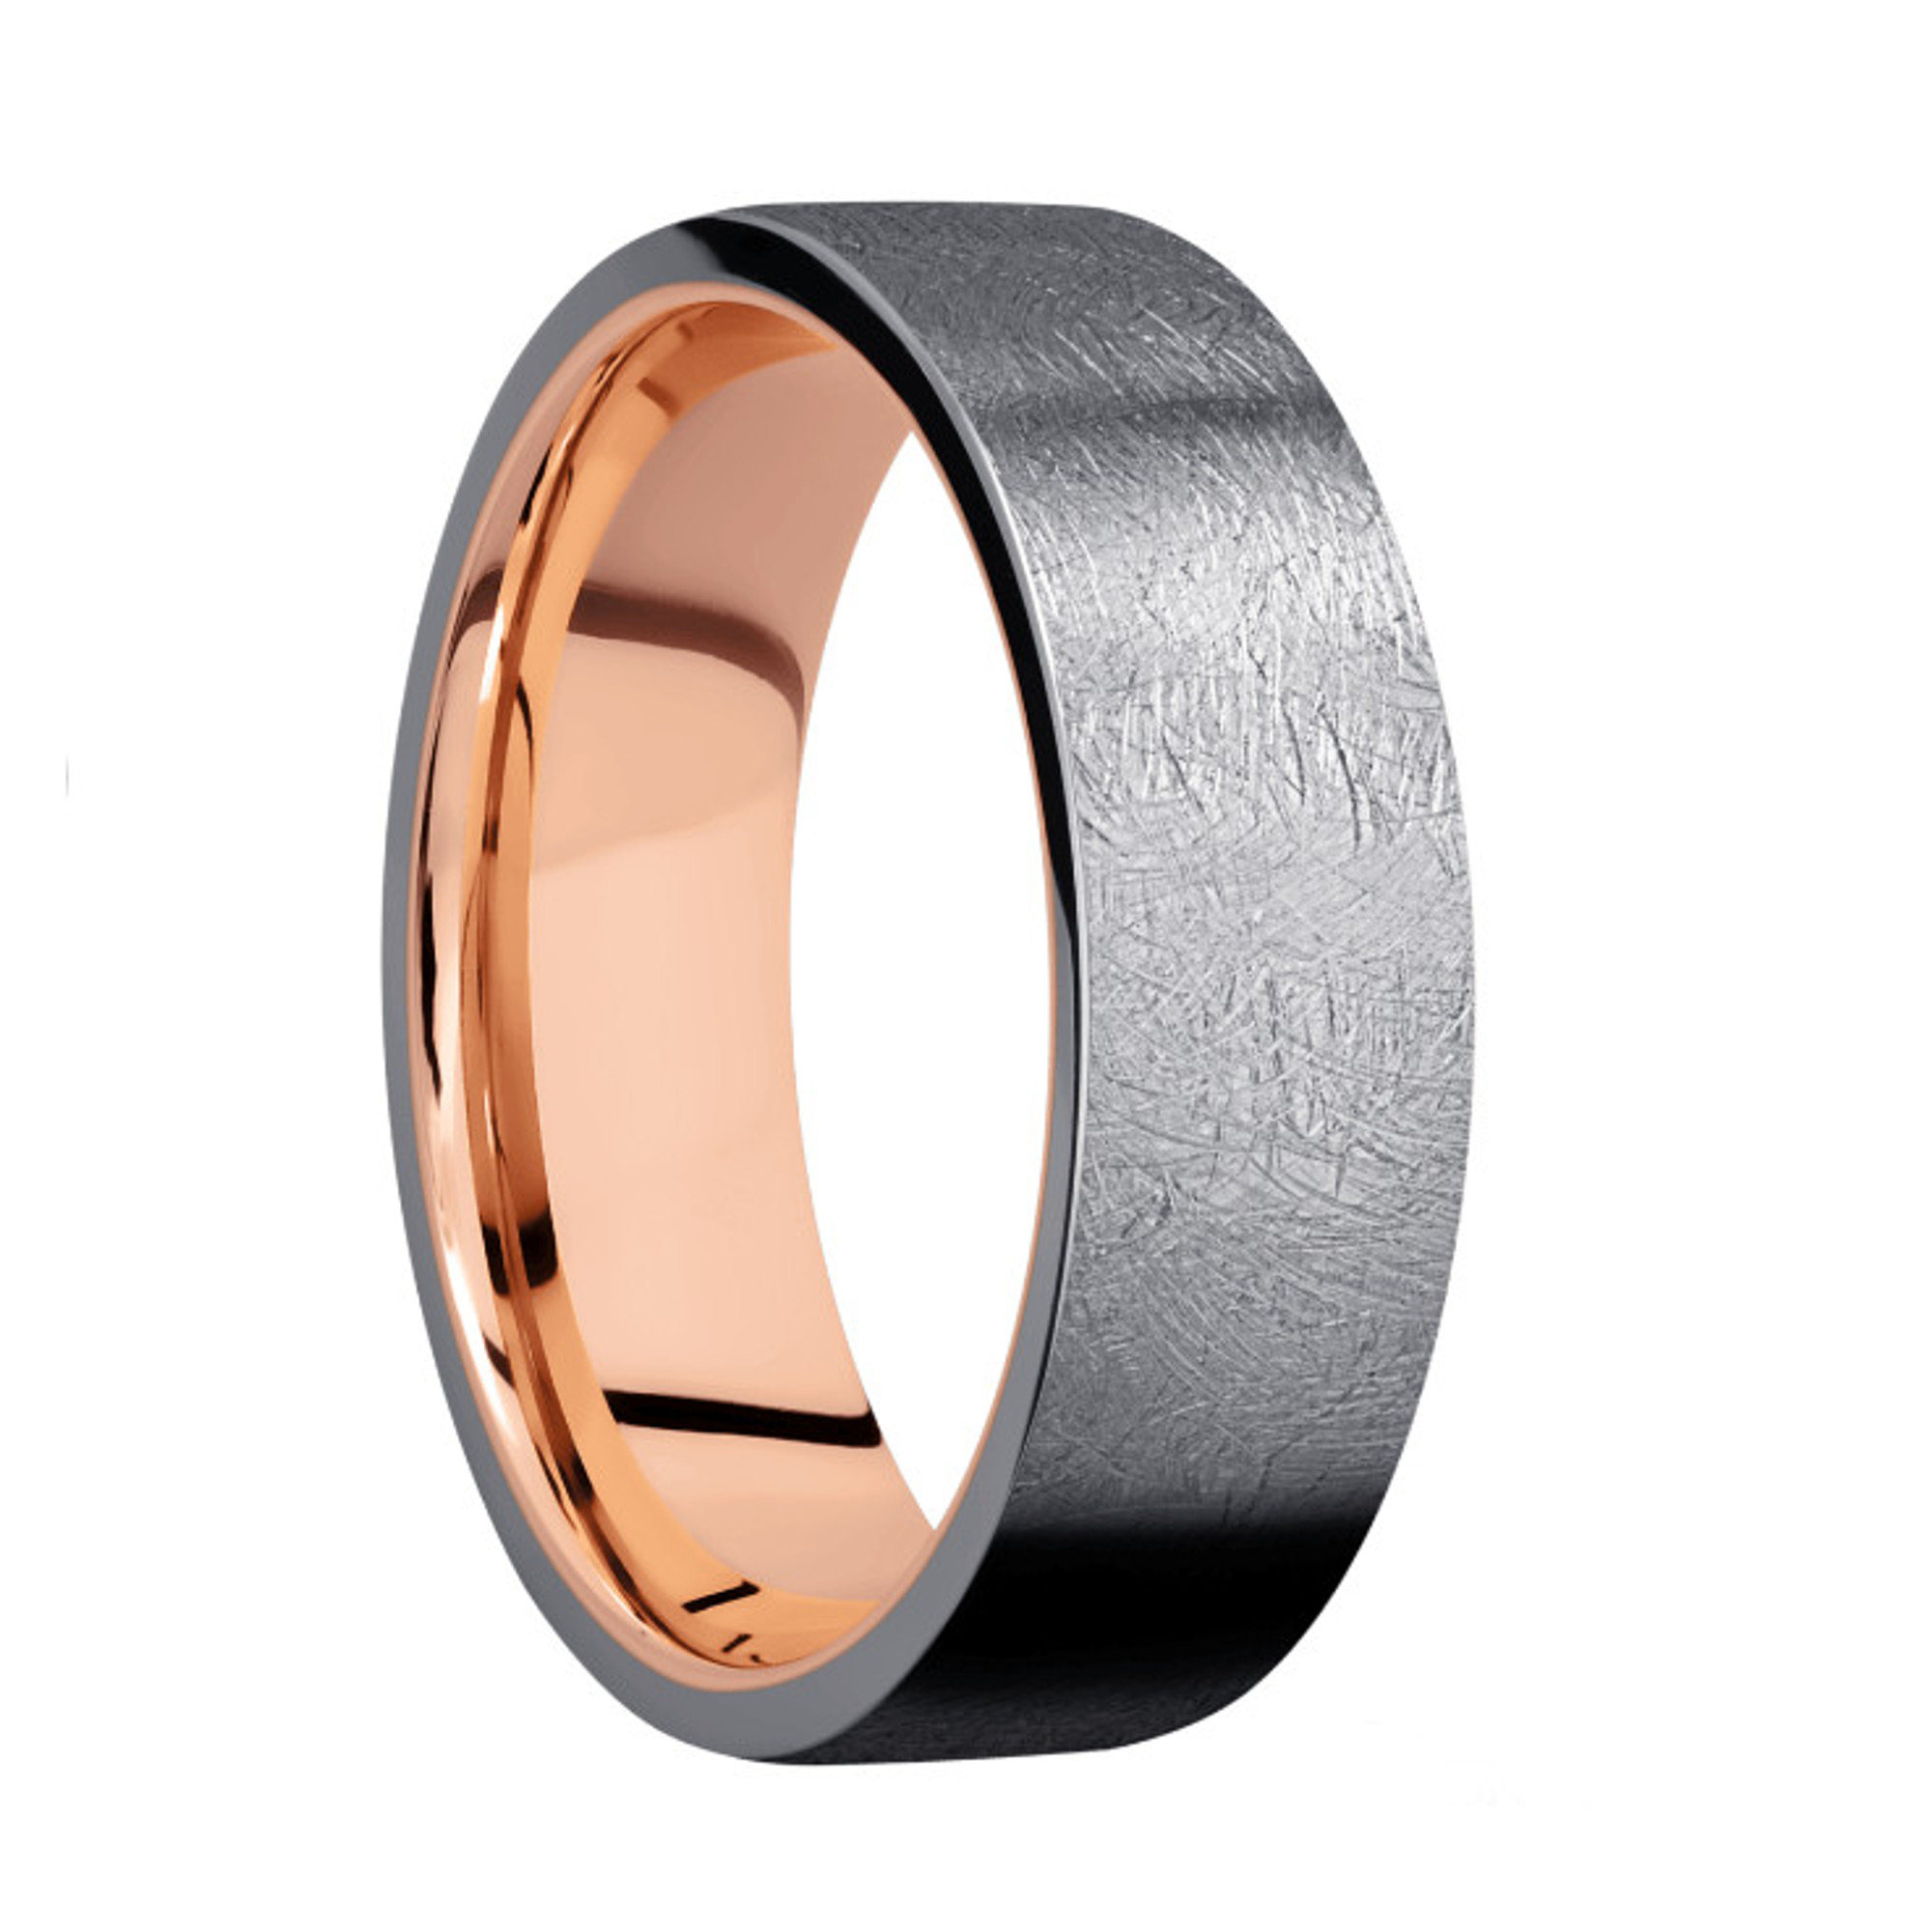 Tantalum 7mm Flat Band with Distressed Finish with 14K Rose Gold Sleeve